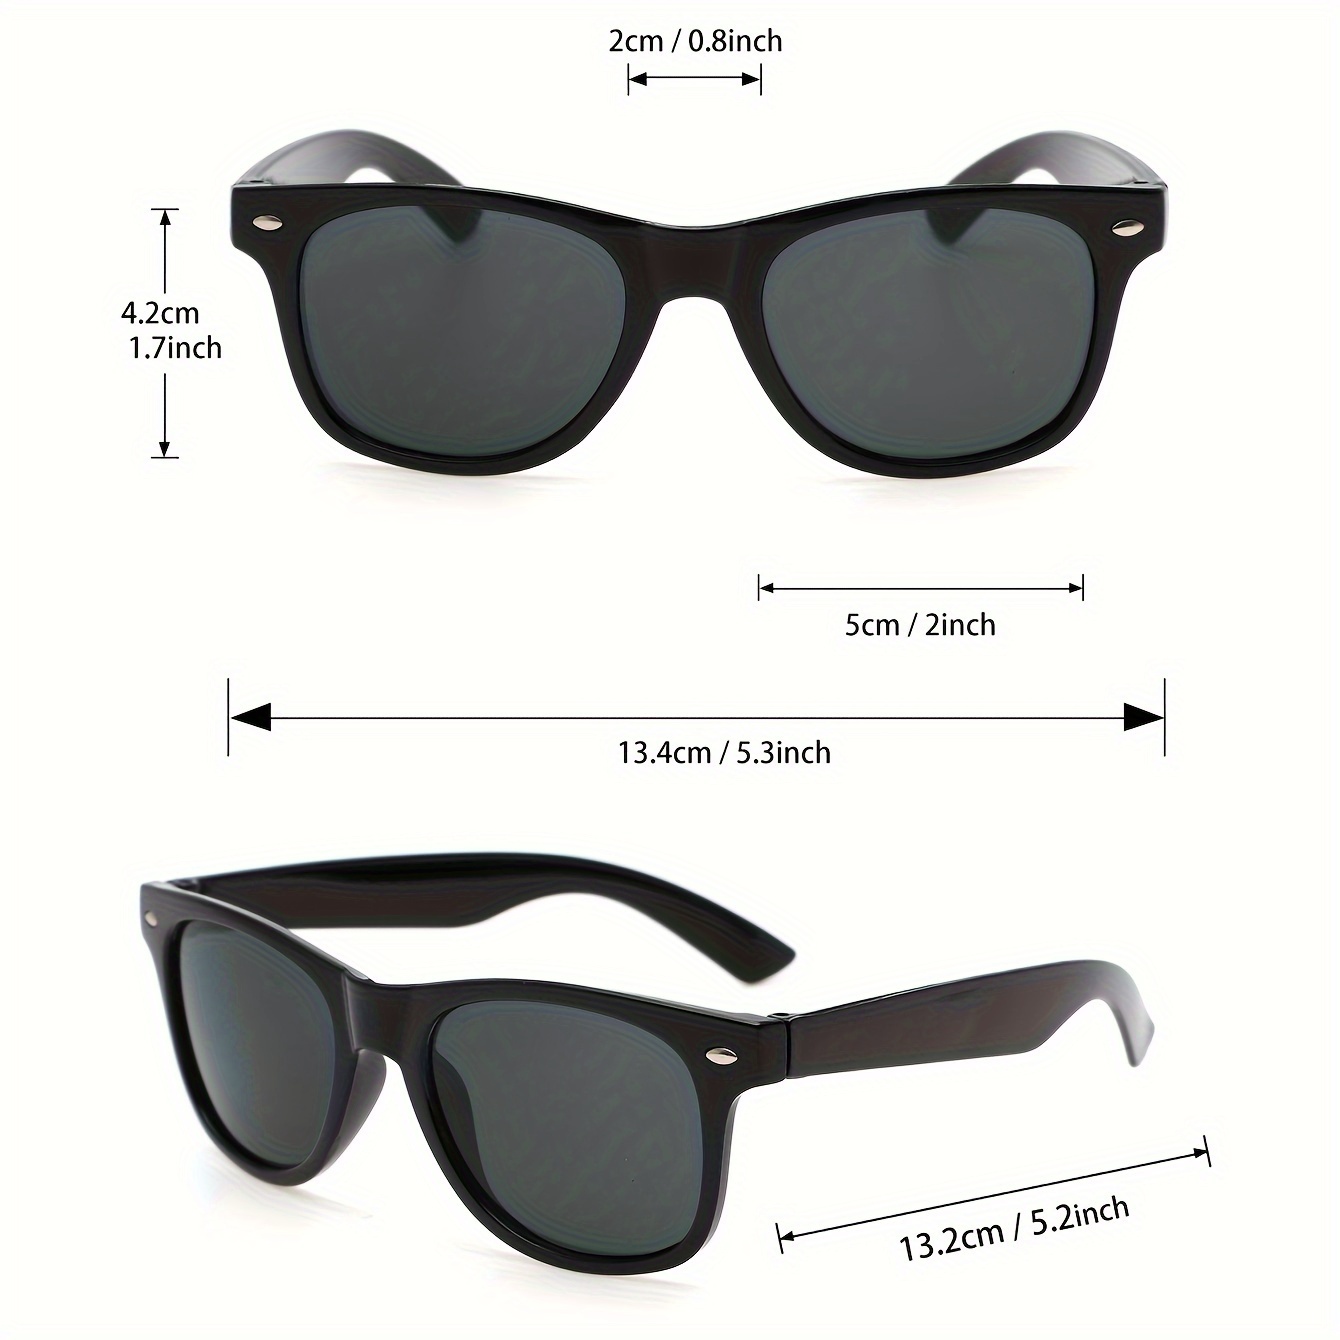 2pairs Trendy Cool Casual Business Large Thick Square Frame Sunglasses Set, Black & Transparent & Gray, for Men Women Outdoor Party Vacation Travel